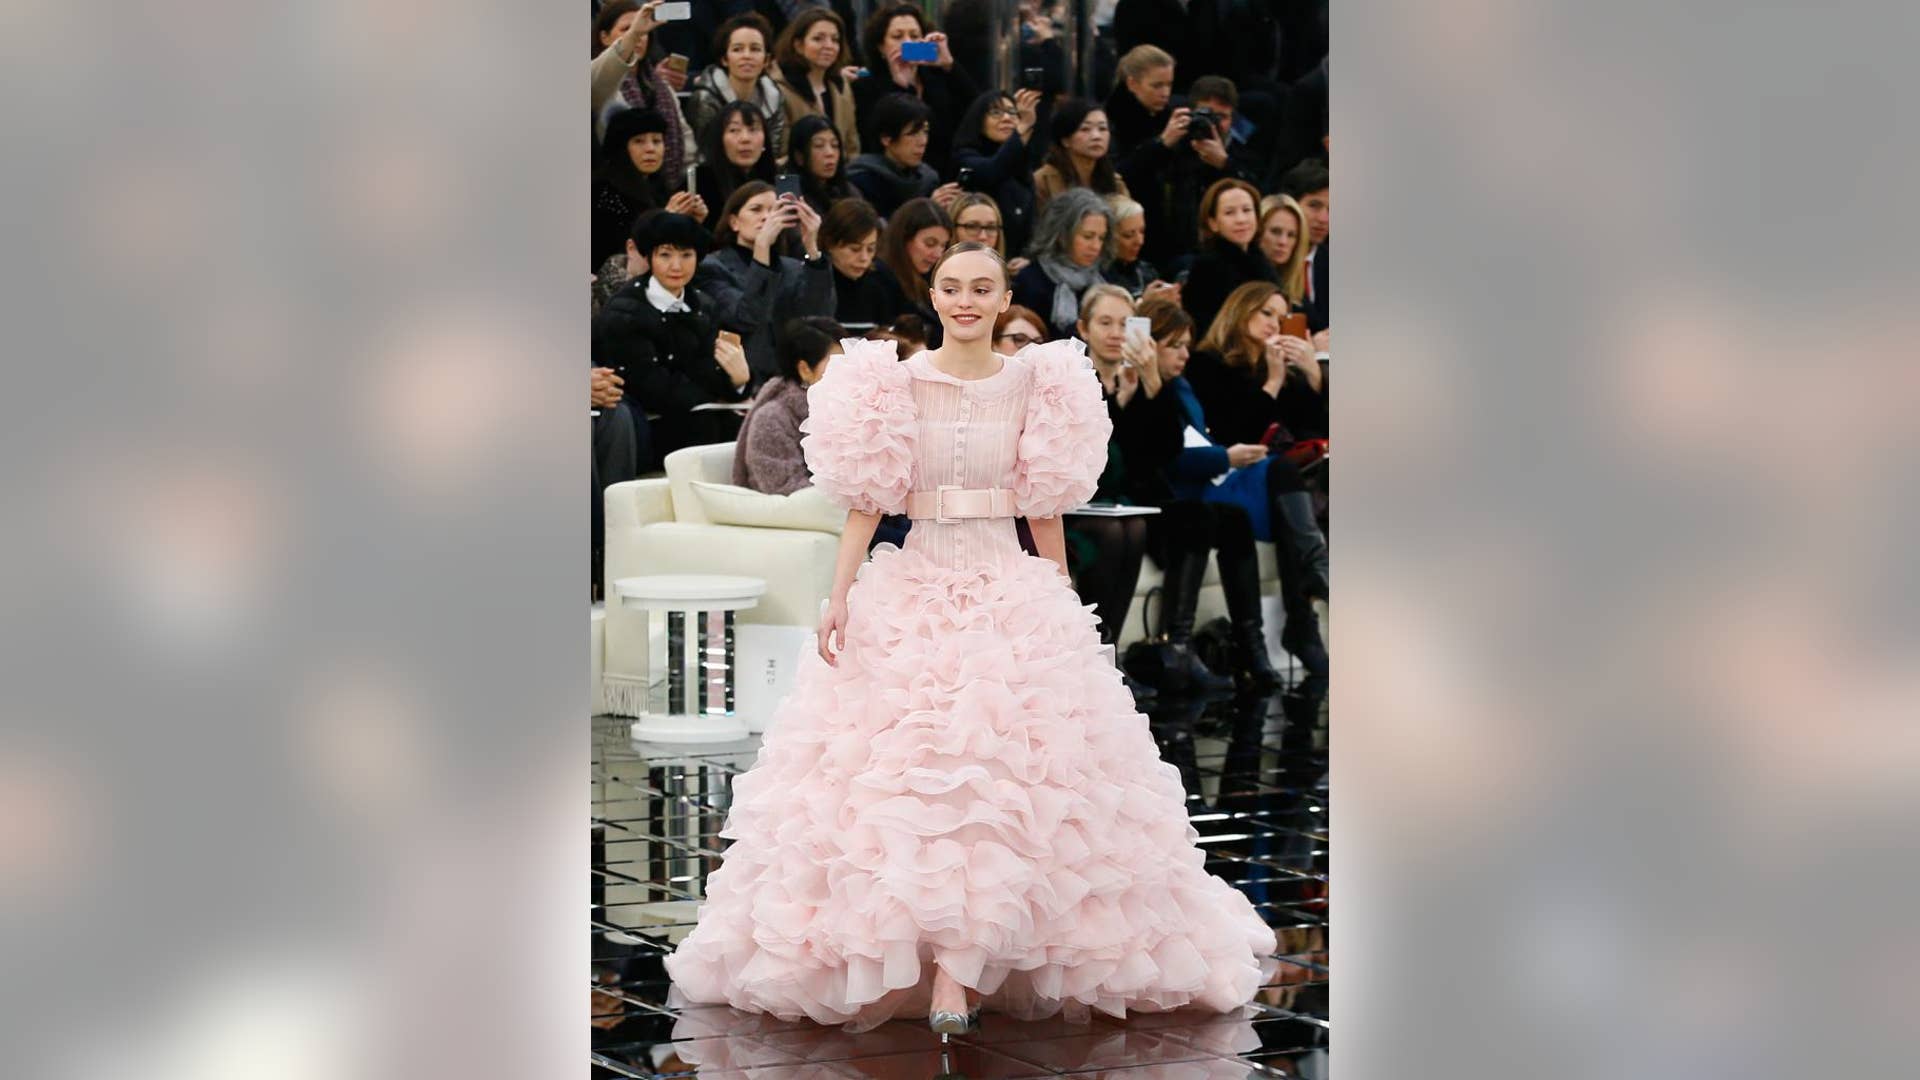 Lily Rose Depp in Chanel attends the 2019 Met Gala in NYC. #bestdressed